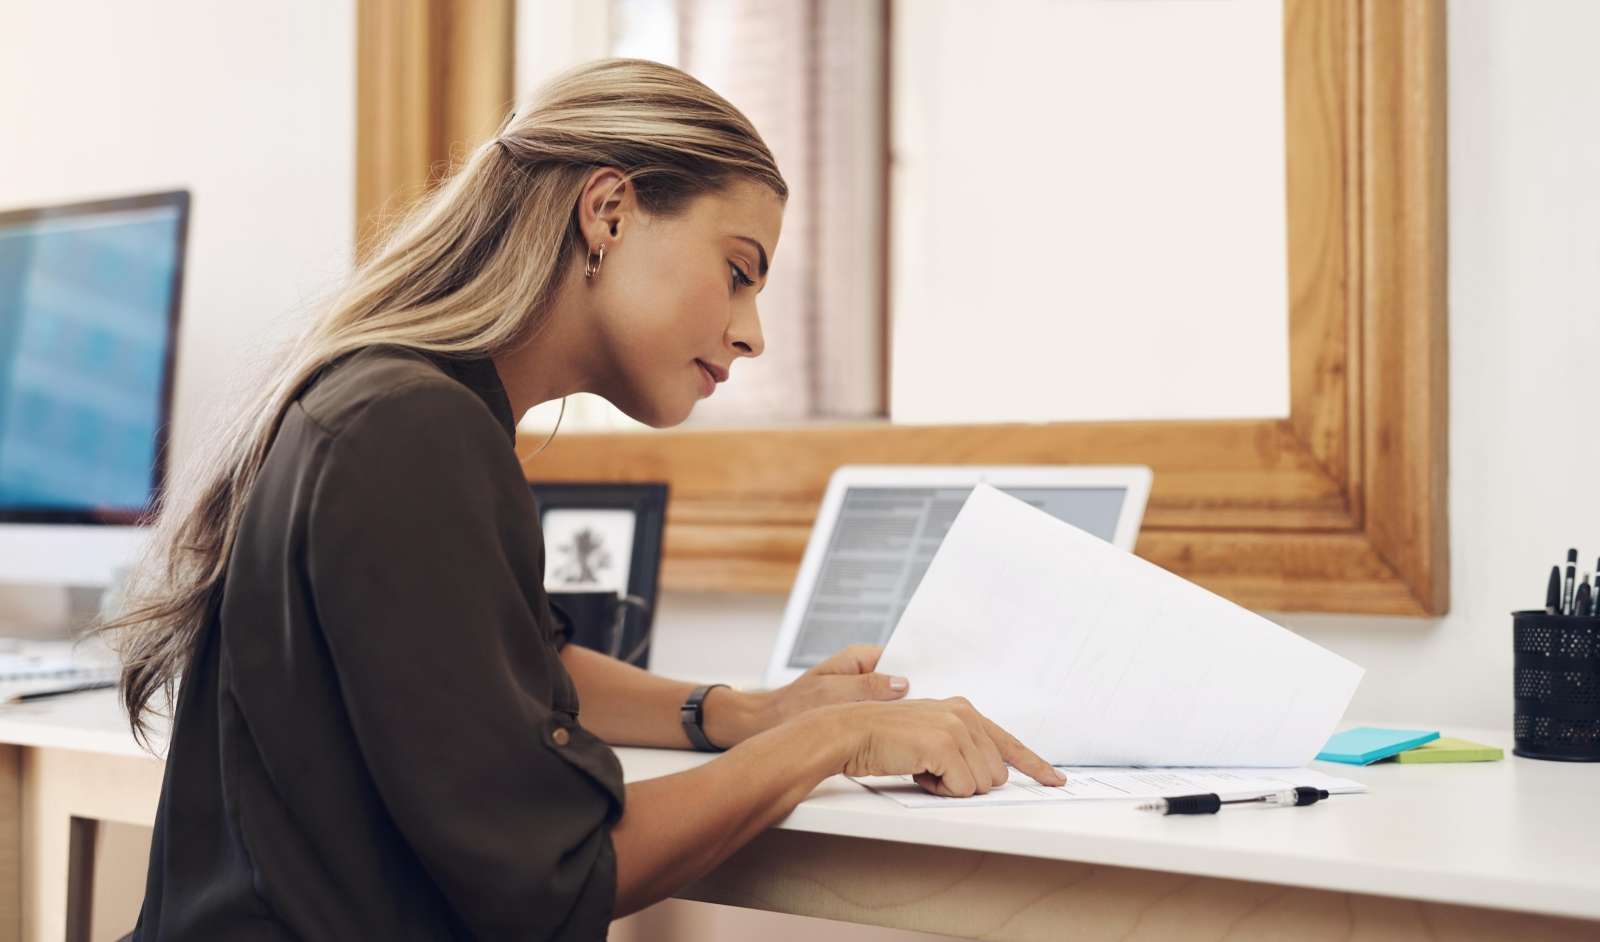 Employee sits at a desk in front of a laptop and points at a page in a document